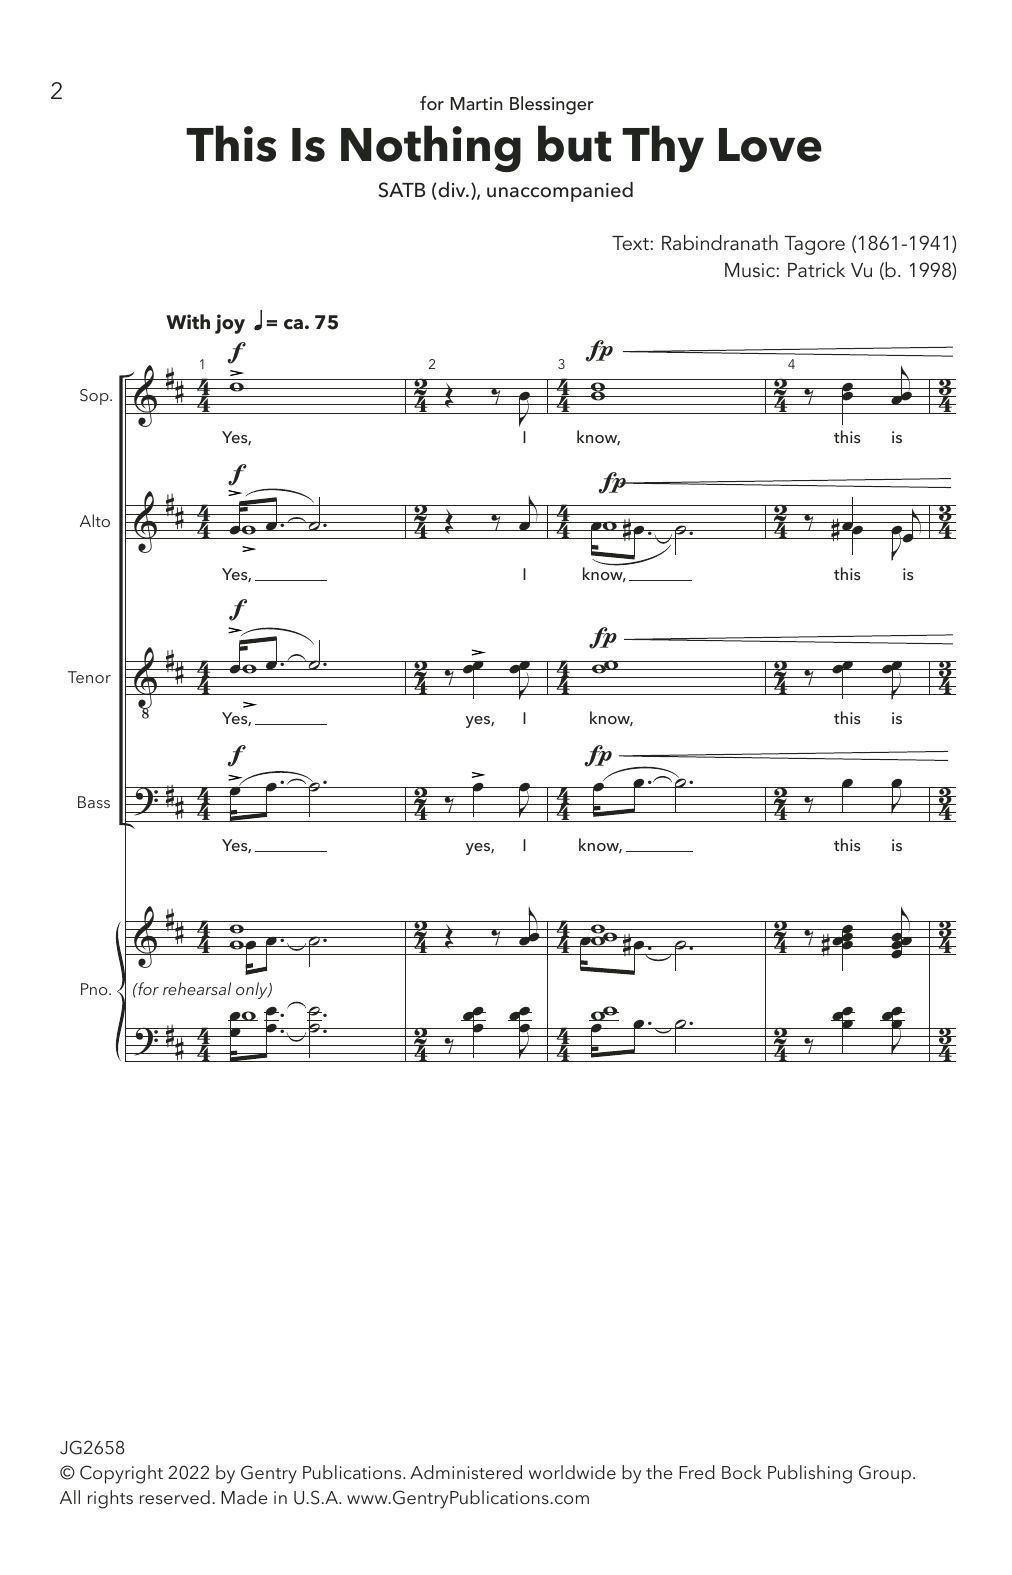 Download Patrick Vu This Is Nothing But Thy Love Sheet Music